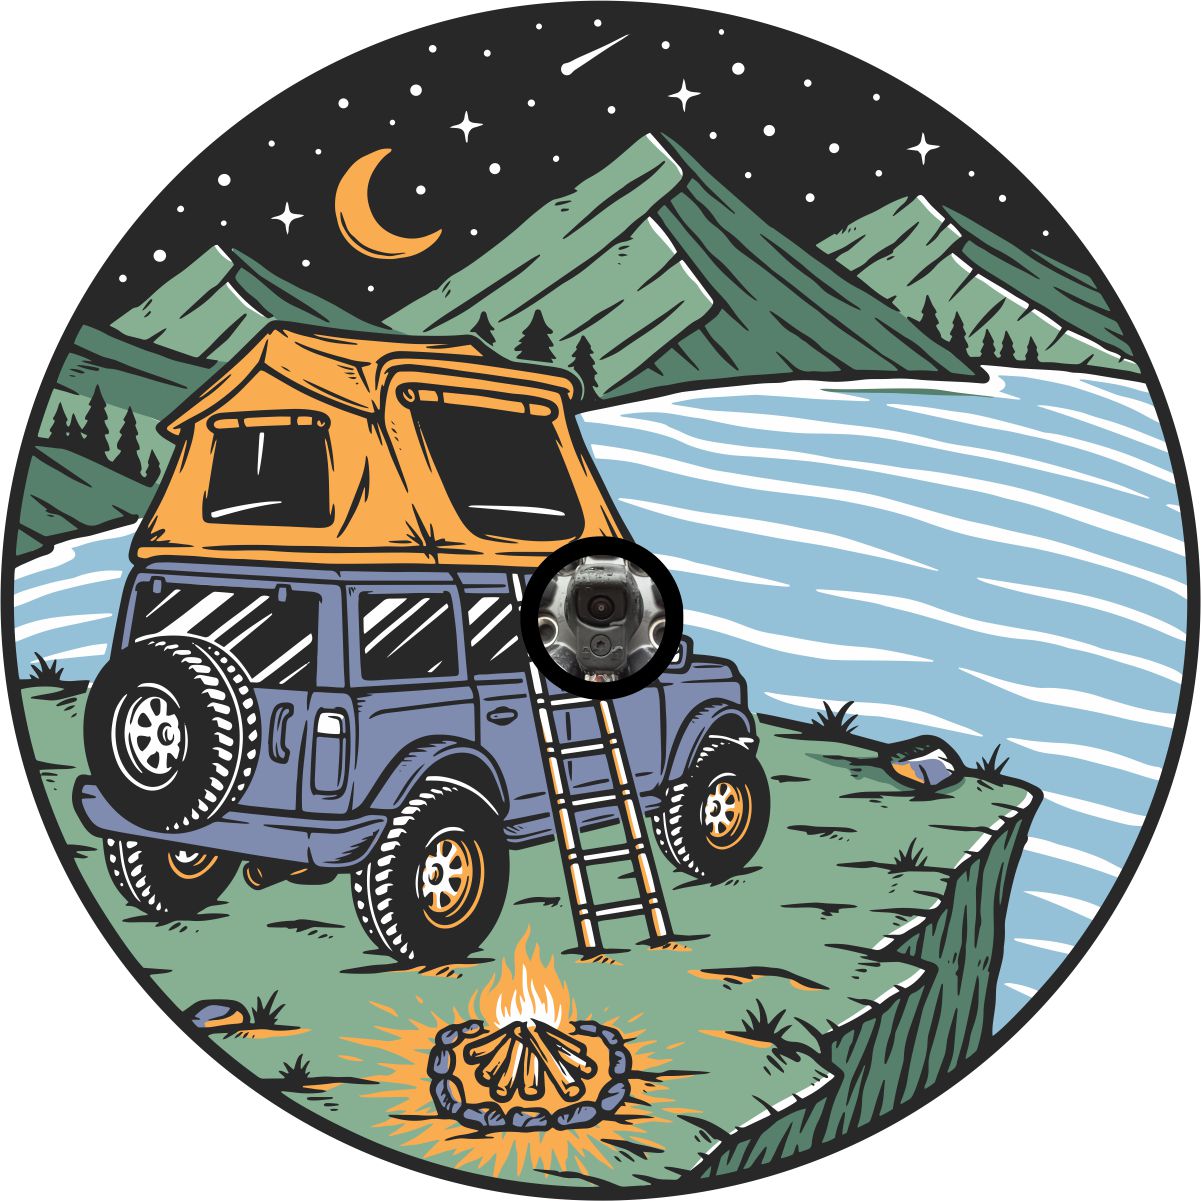 Camping spare tire cover design with a back up camera hole. Campsite camping with your SUV and a rooftop tent on a mountain side overlooking the water under the night sky. Creative spare tire cover for camping enthusiasts.